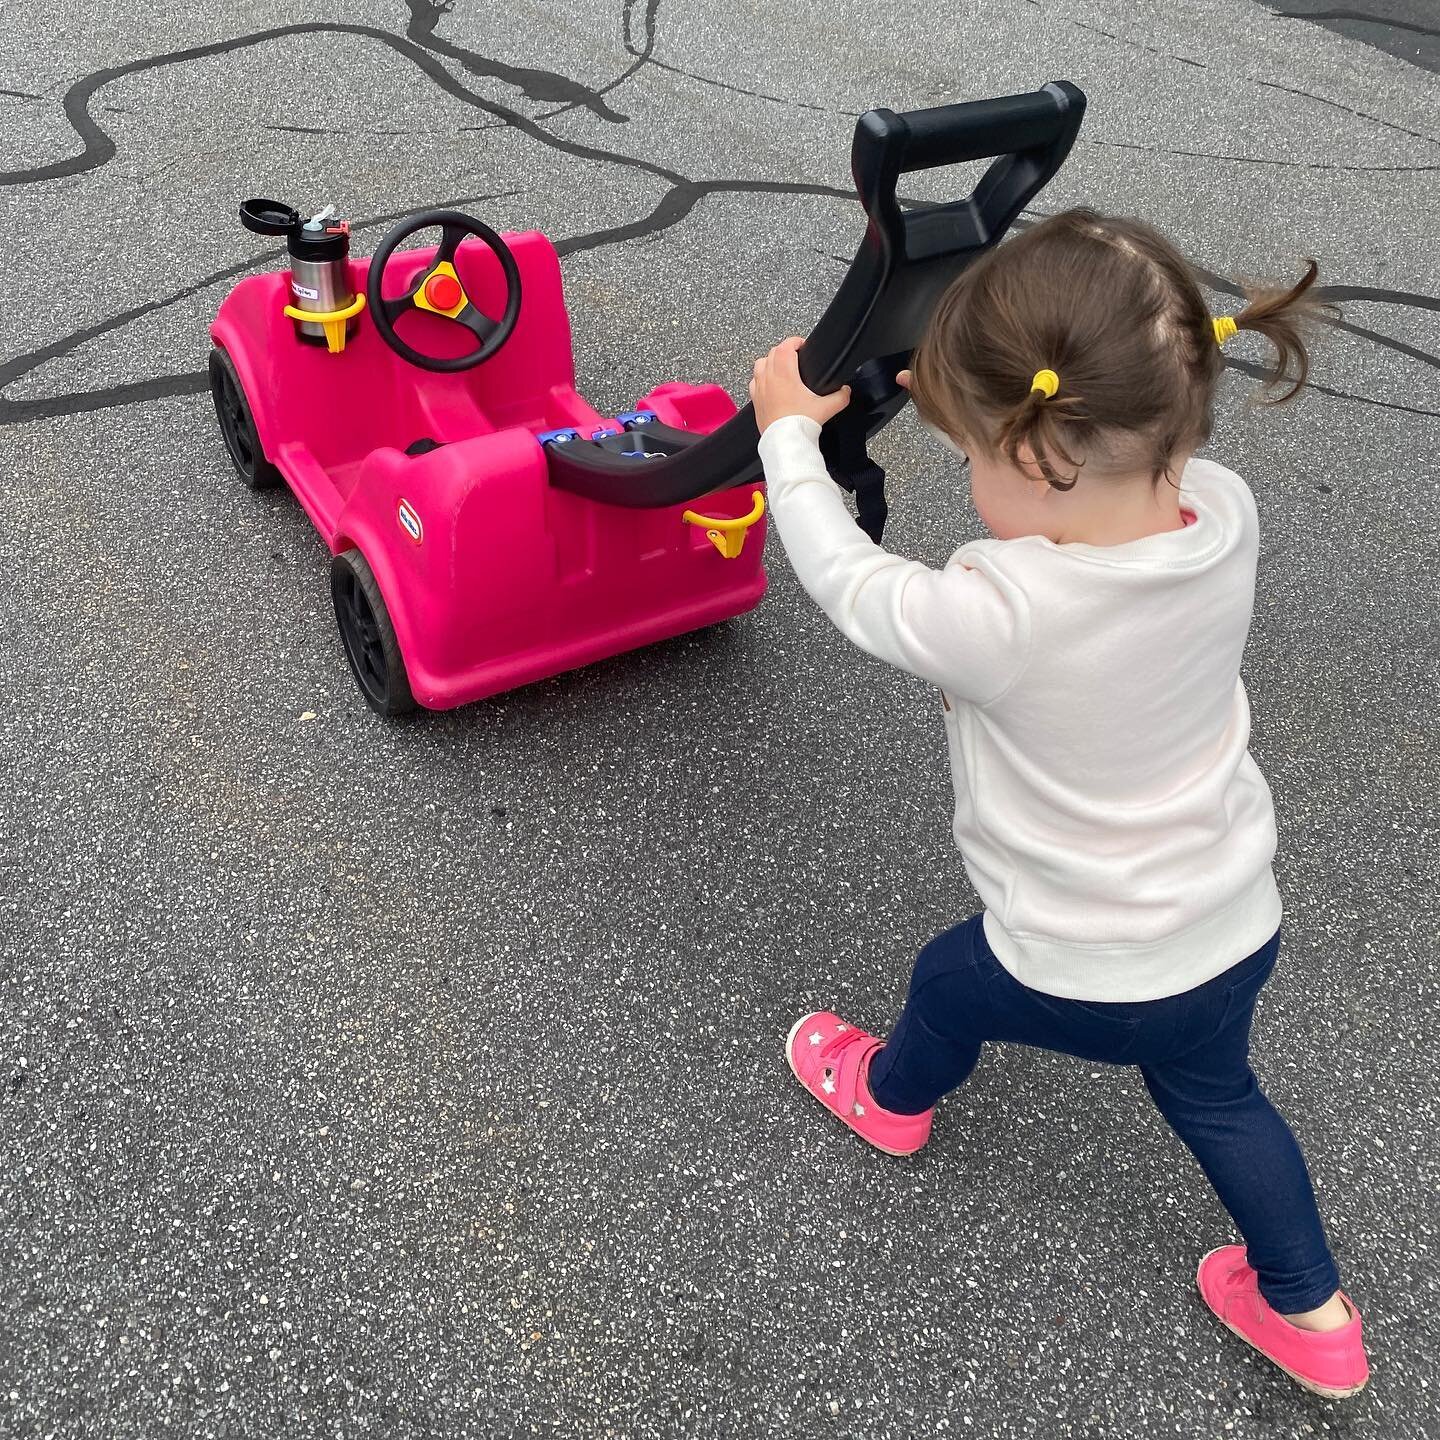 Taking her car for a walk #ittybittymisslily